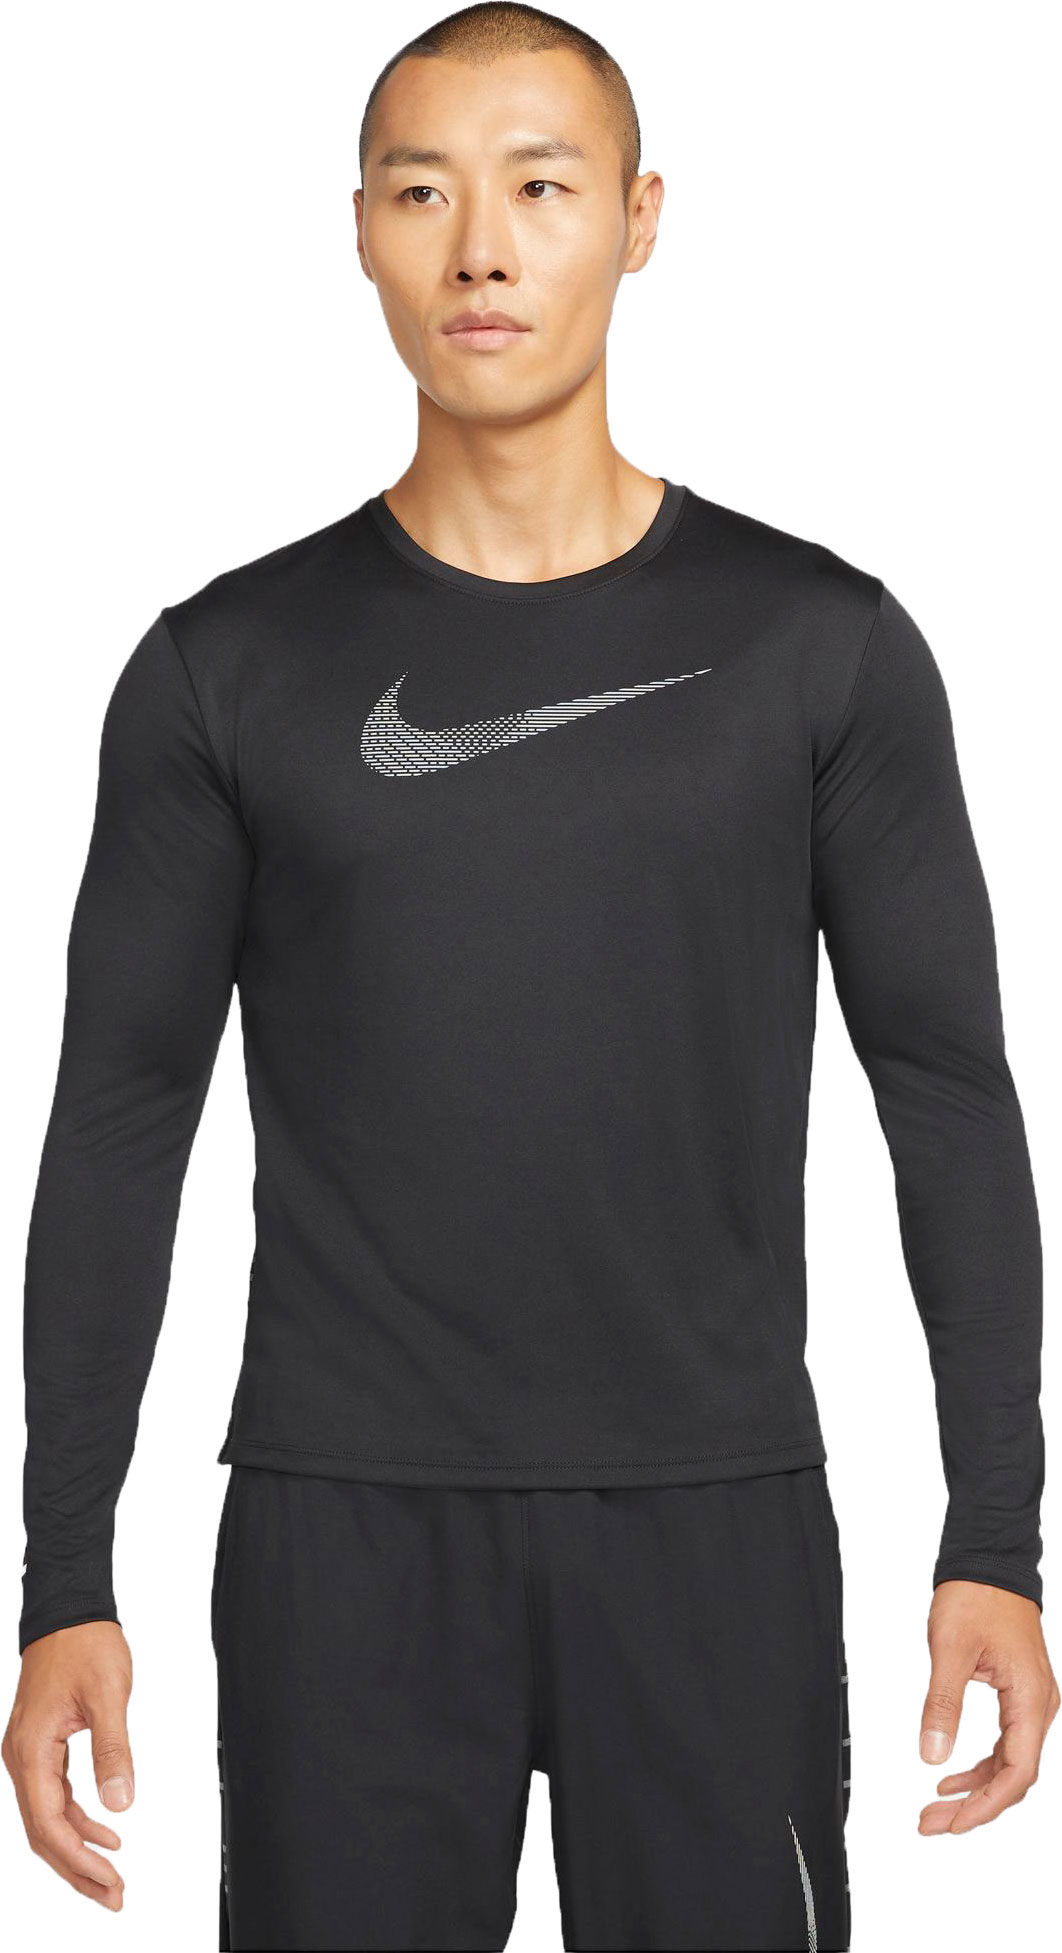 Men’s top with long sleeves